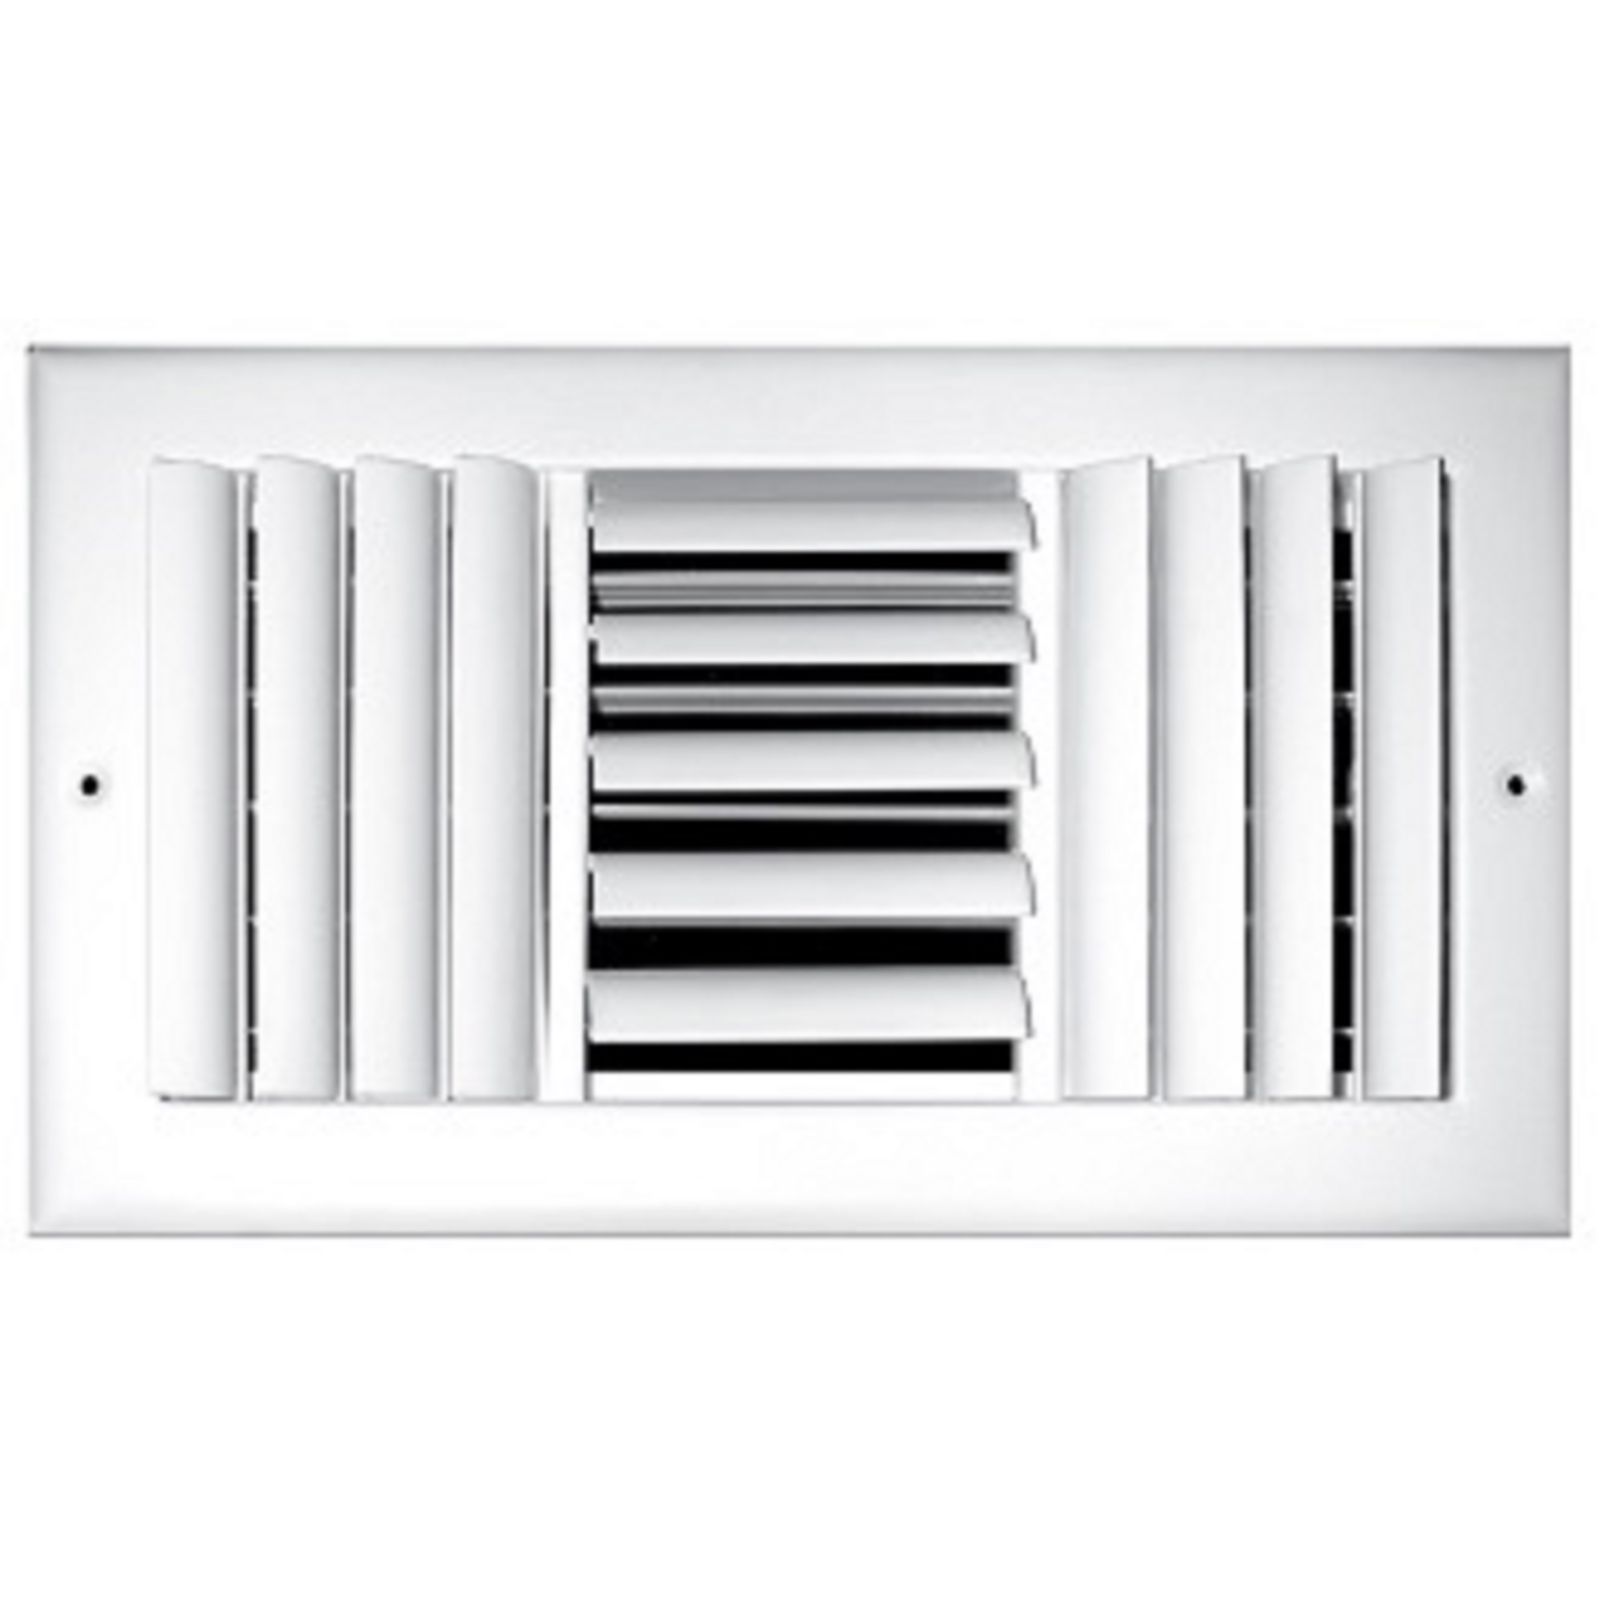 TRUaire 304-O 06X06 - Steel Adjustable Curved Blade Wall/Ceiling Register With Opposed Blade Damper, 4-Way, White, 06" X 06"